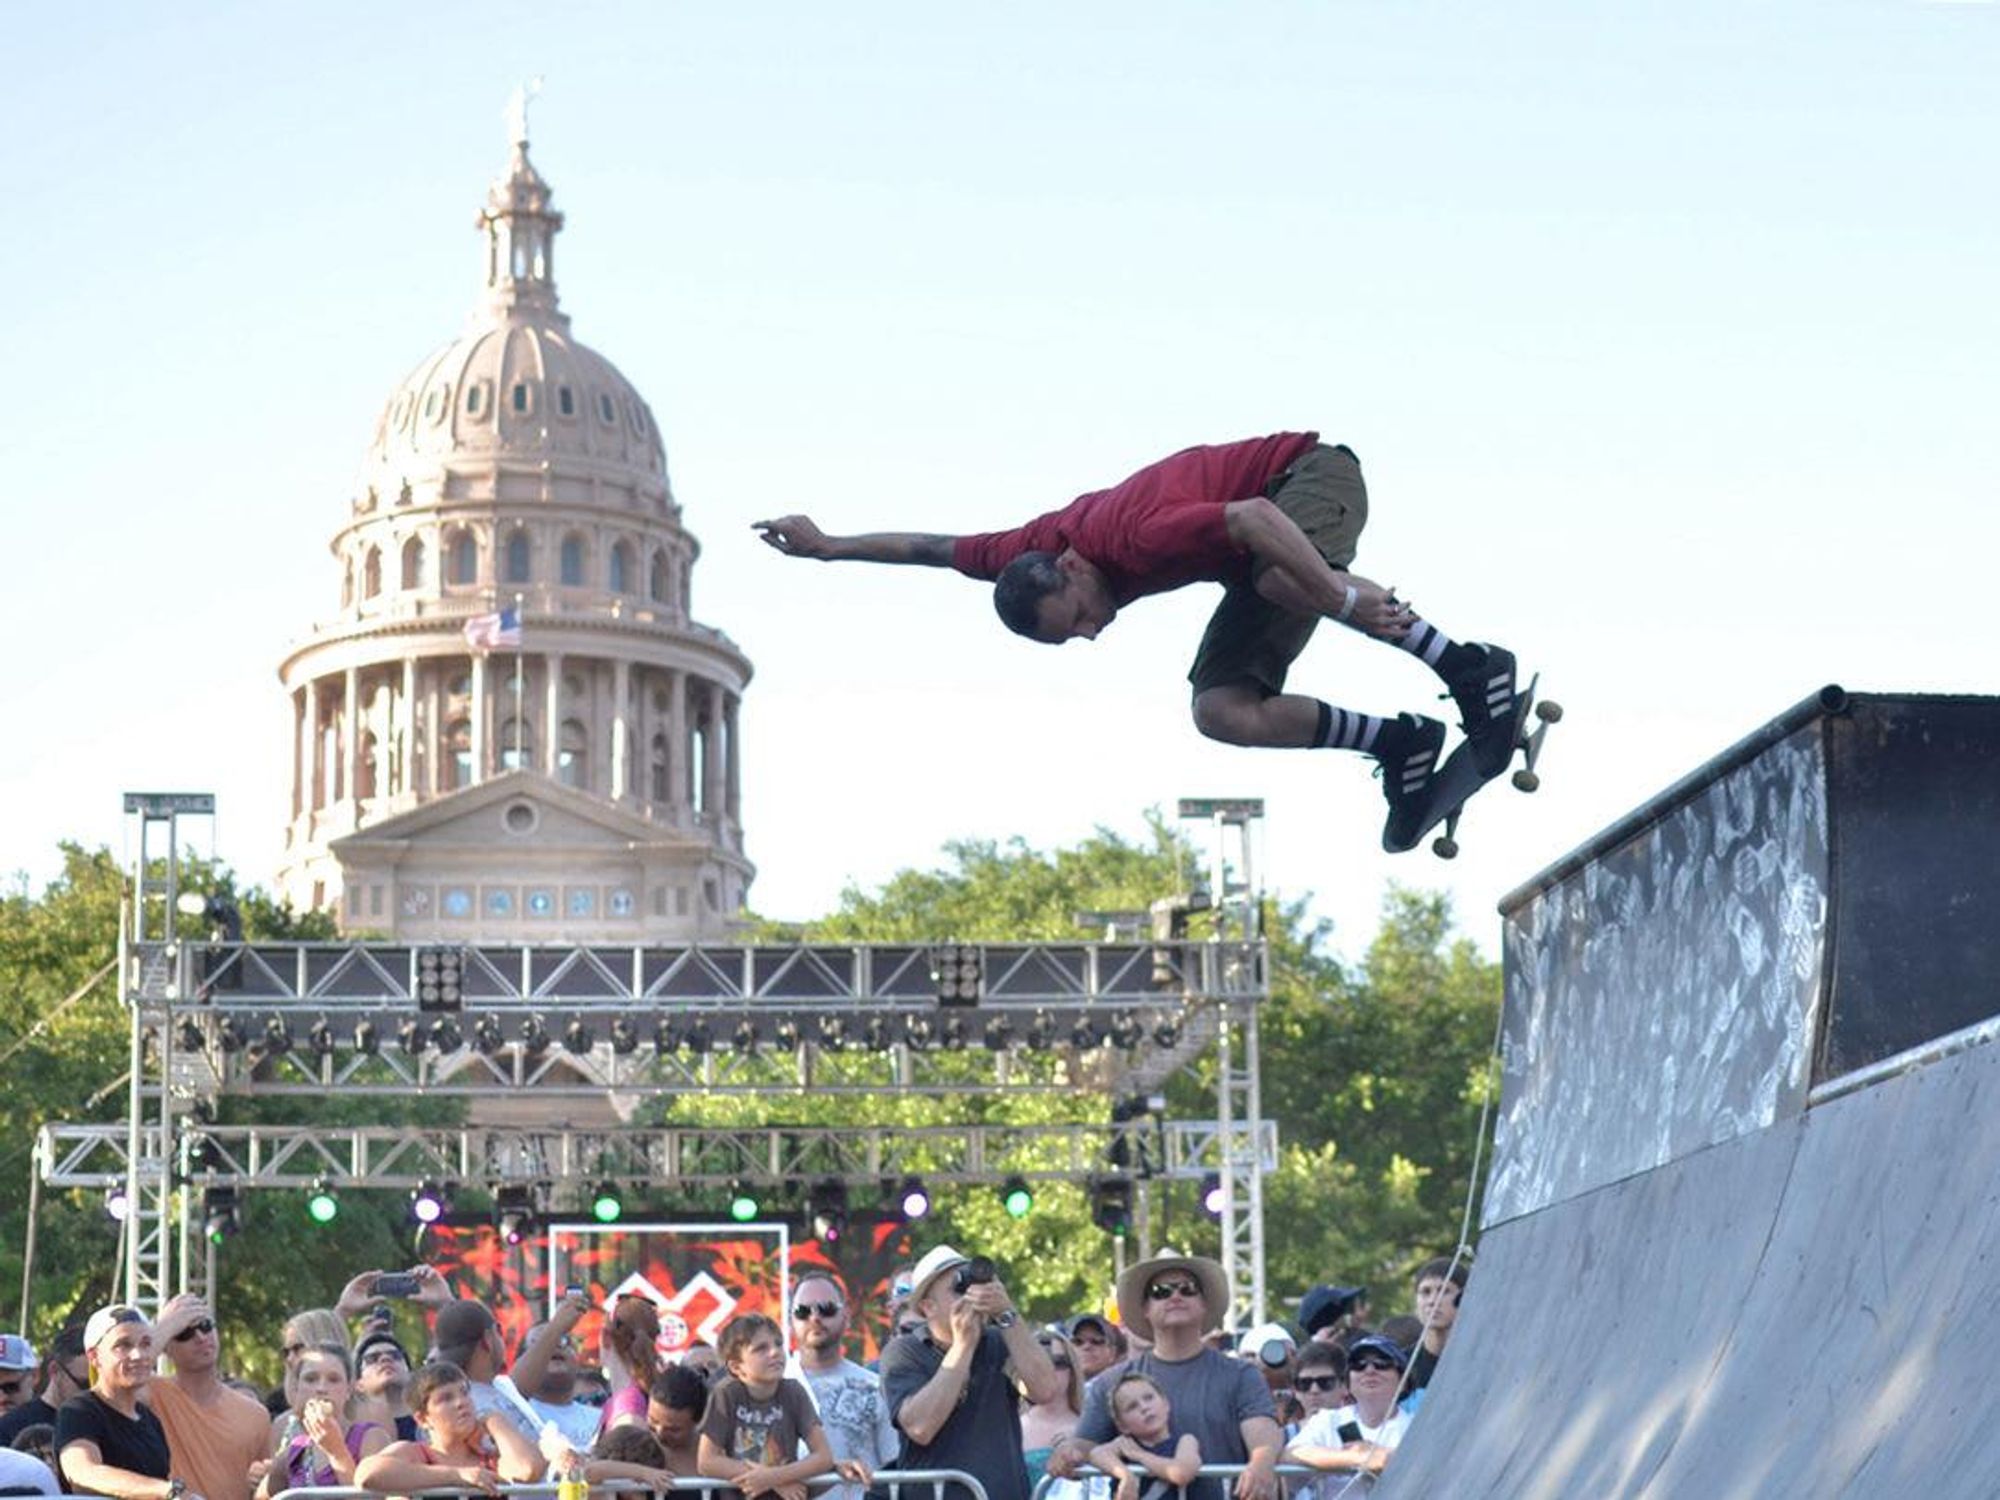 x games rally with the capital in the background